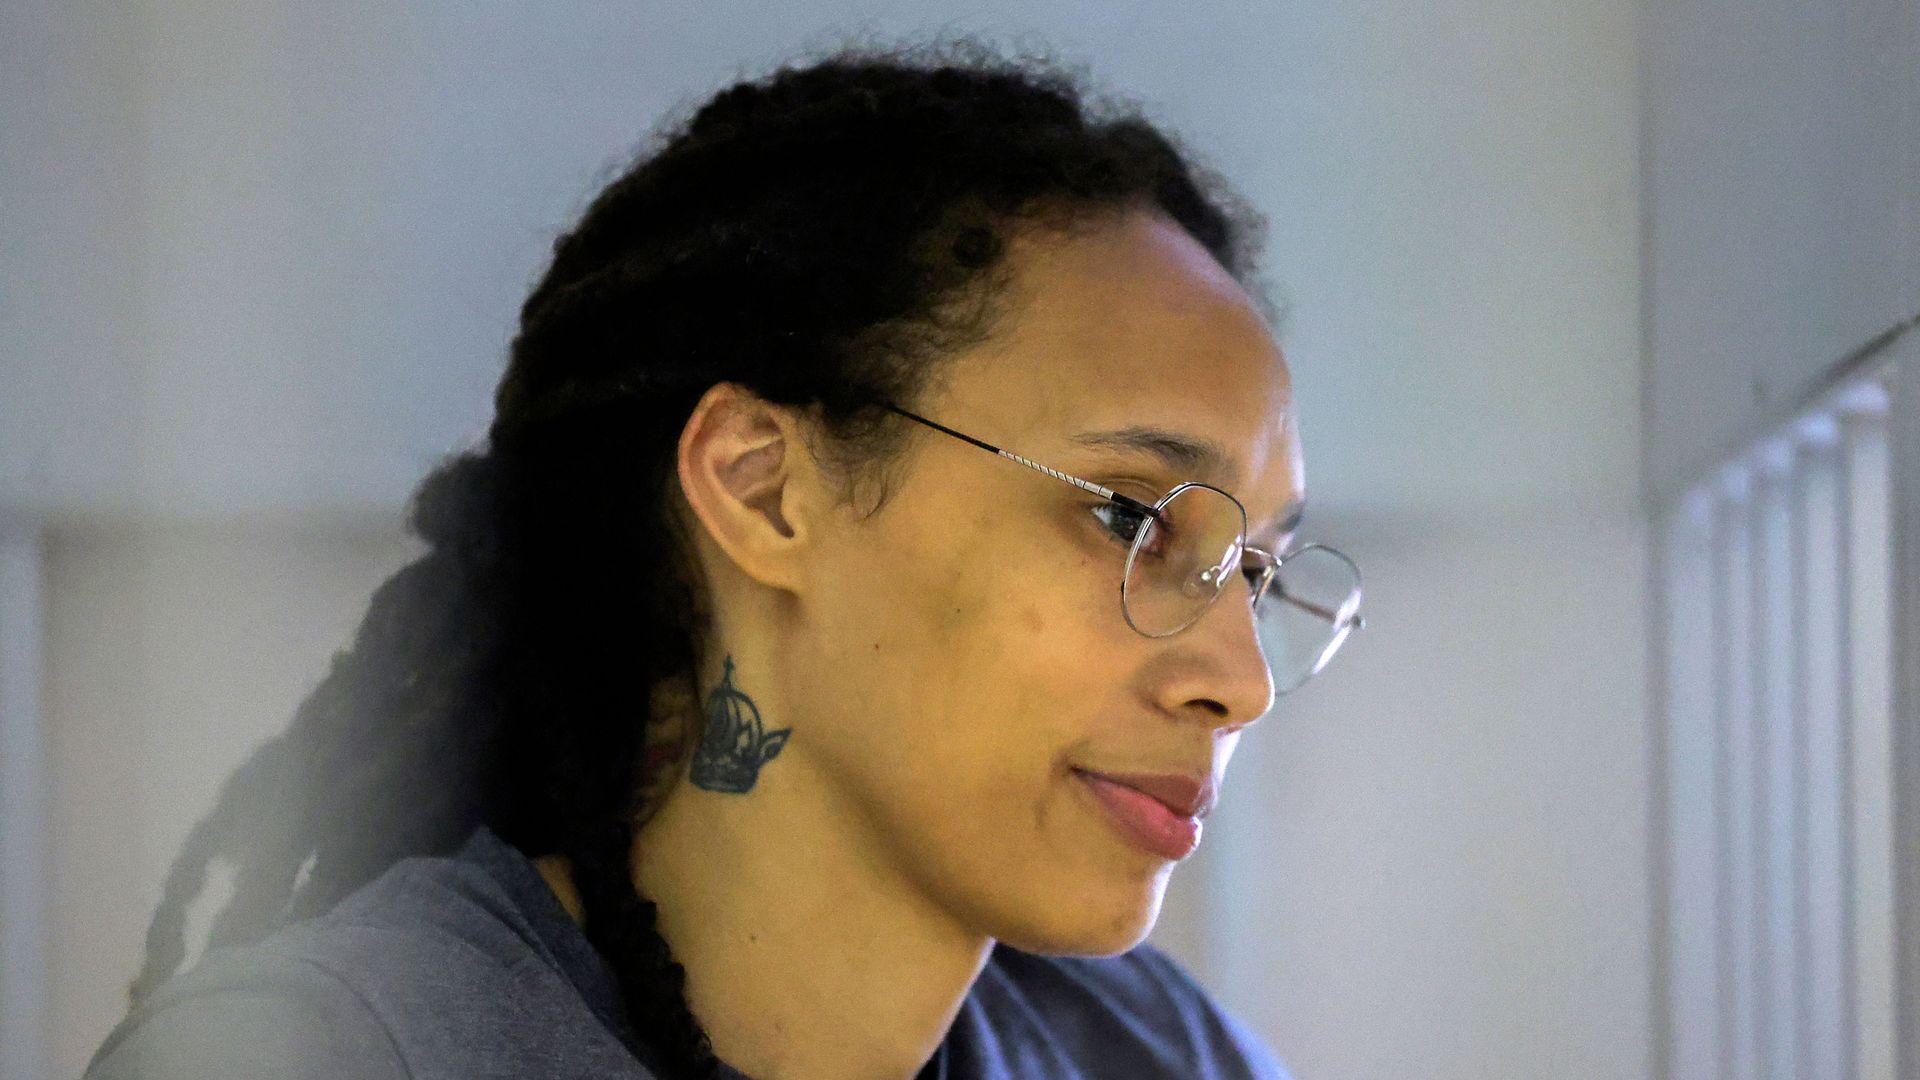 Brittney Griner waits for the verdict inside a defendants' cage during a hearing in Khimki 